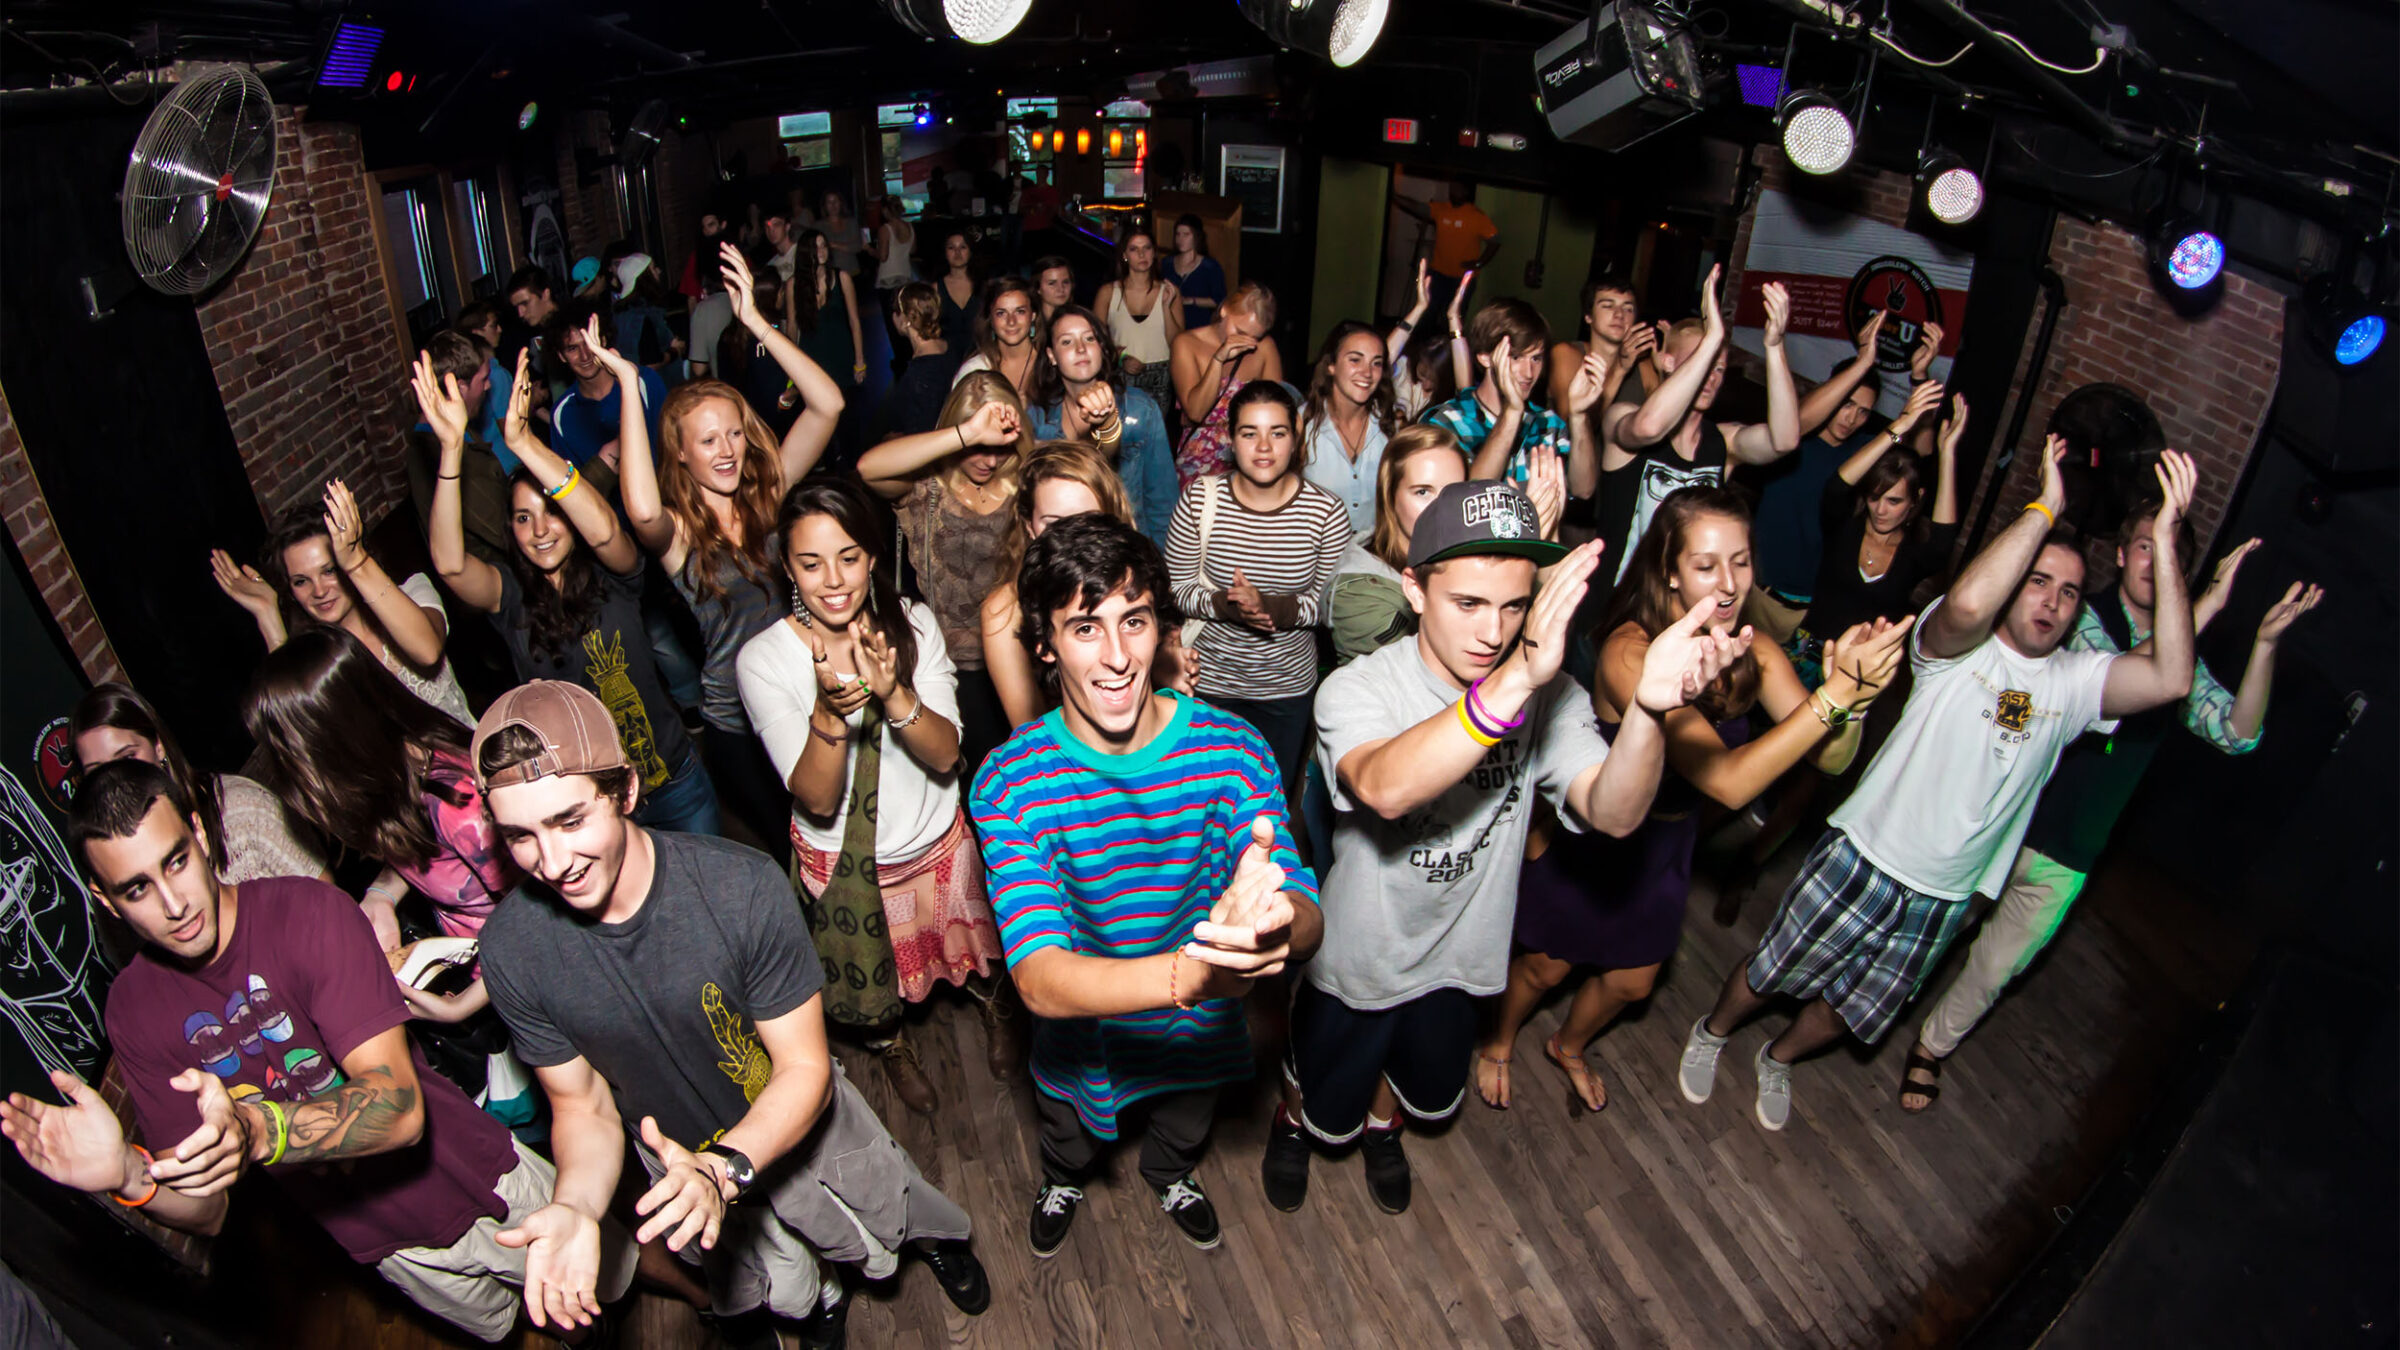 group of students clapping in a club-like environment